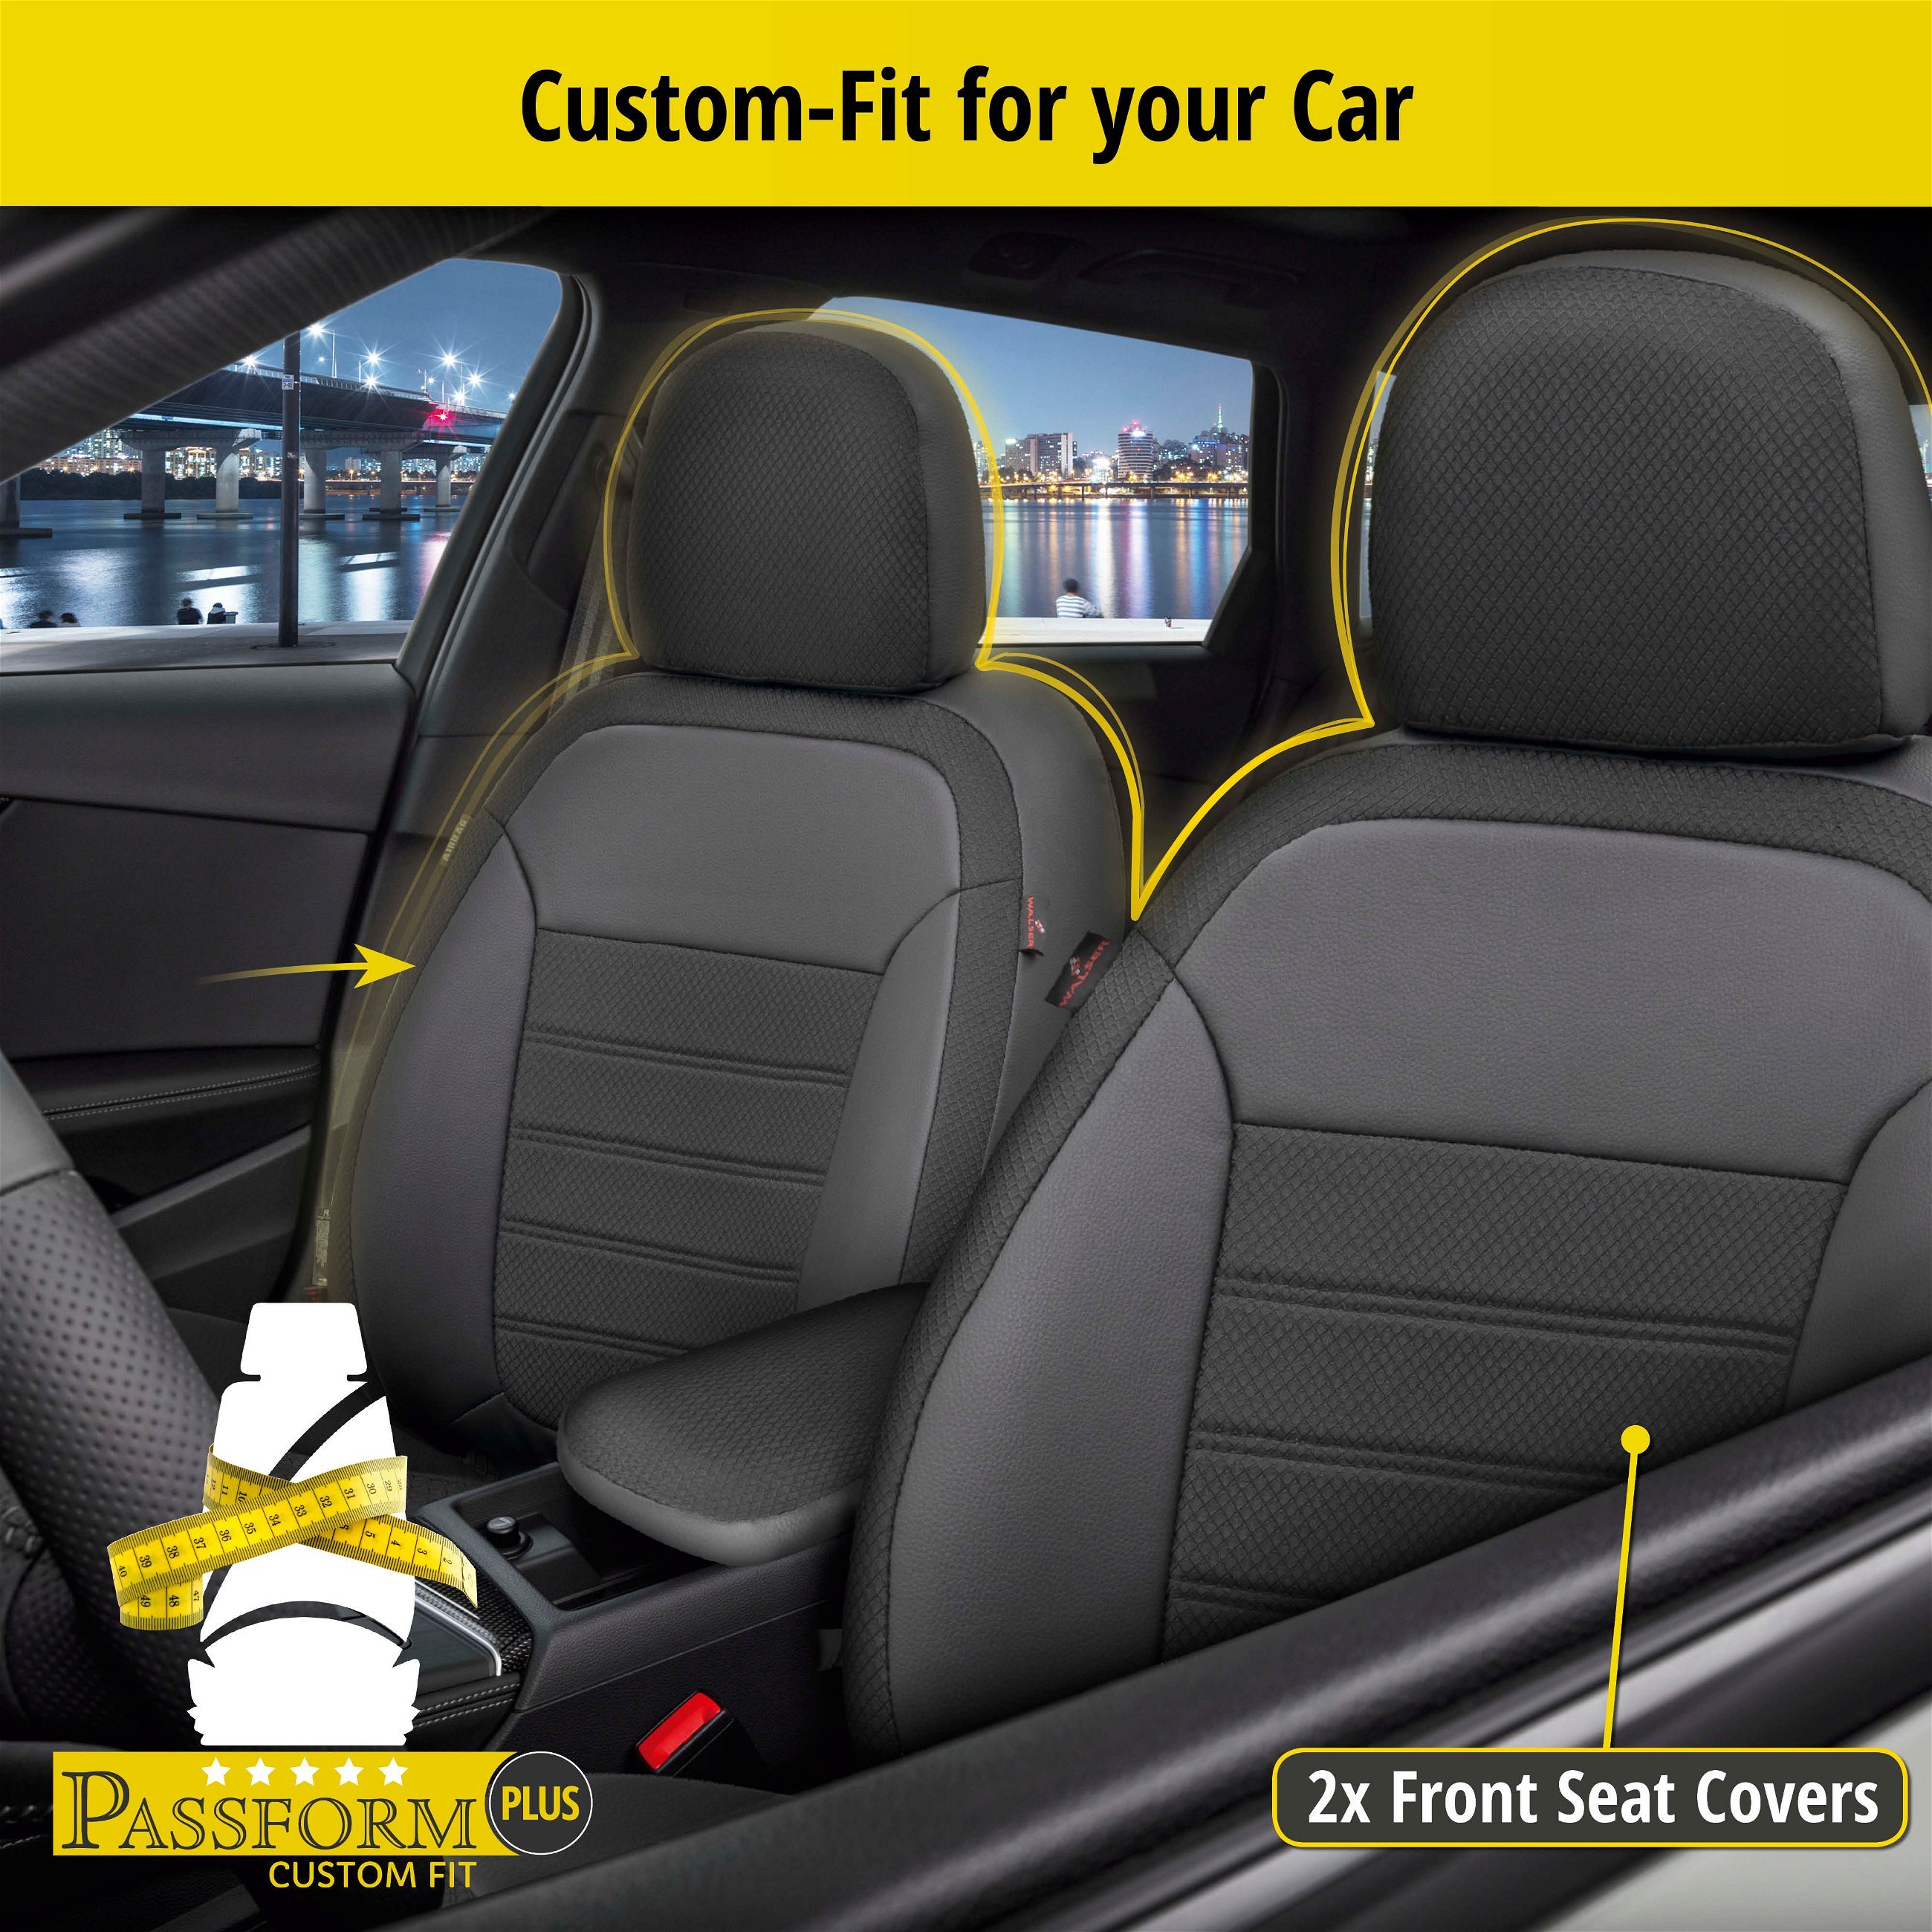 Seat Cover Aversa for Suzuki Swift IV (FZ, NZ) 10/2010-Today, 2 seat covers for normal seats